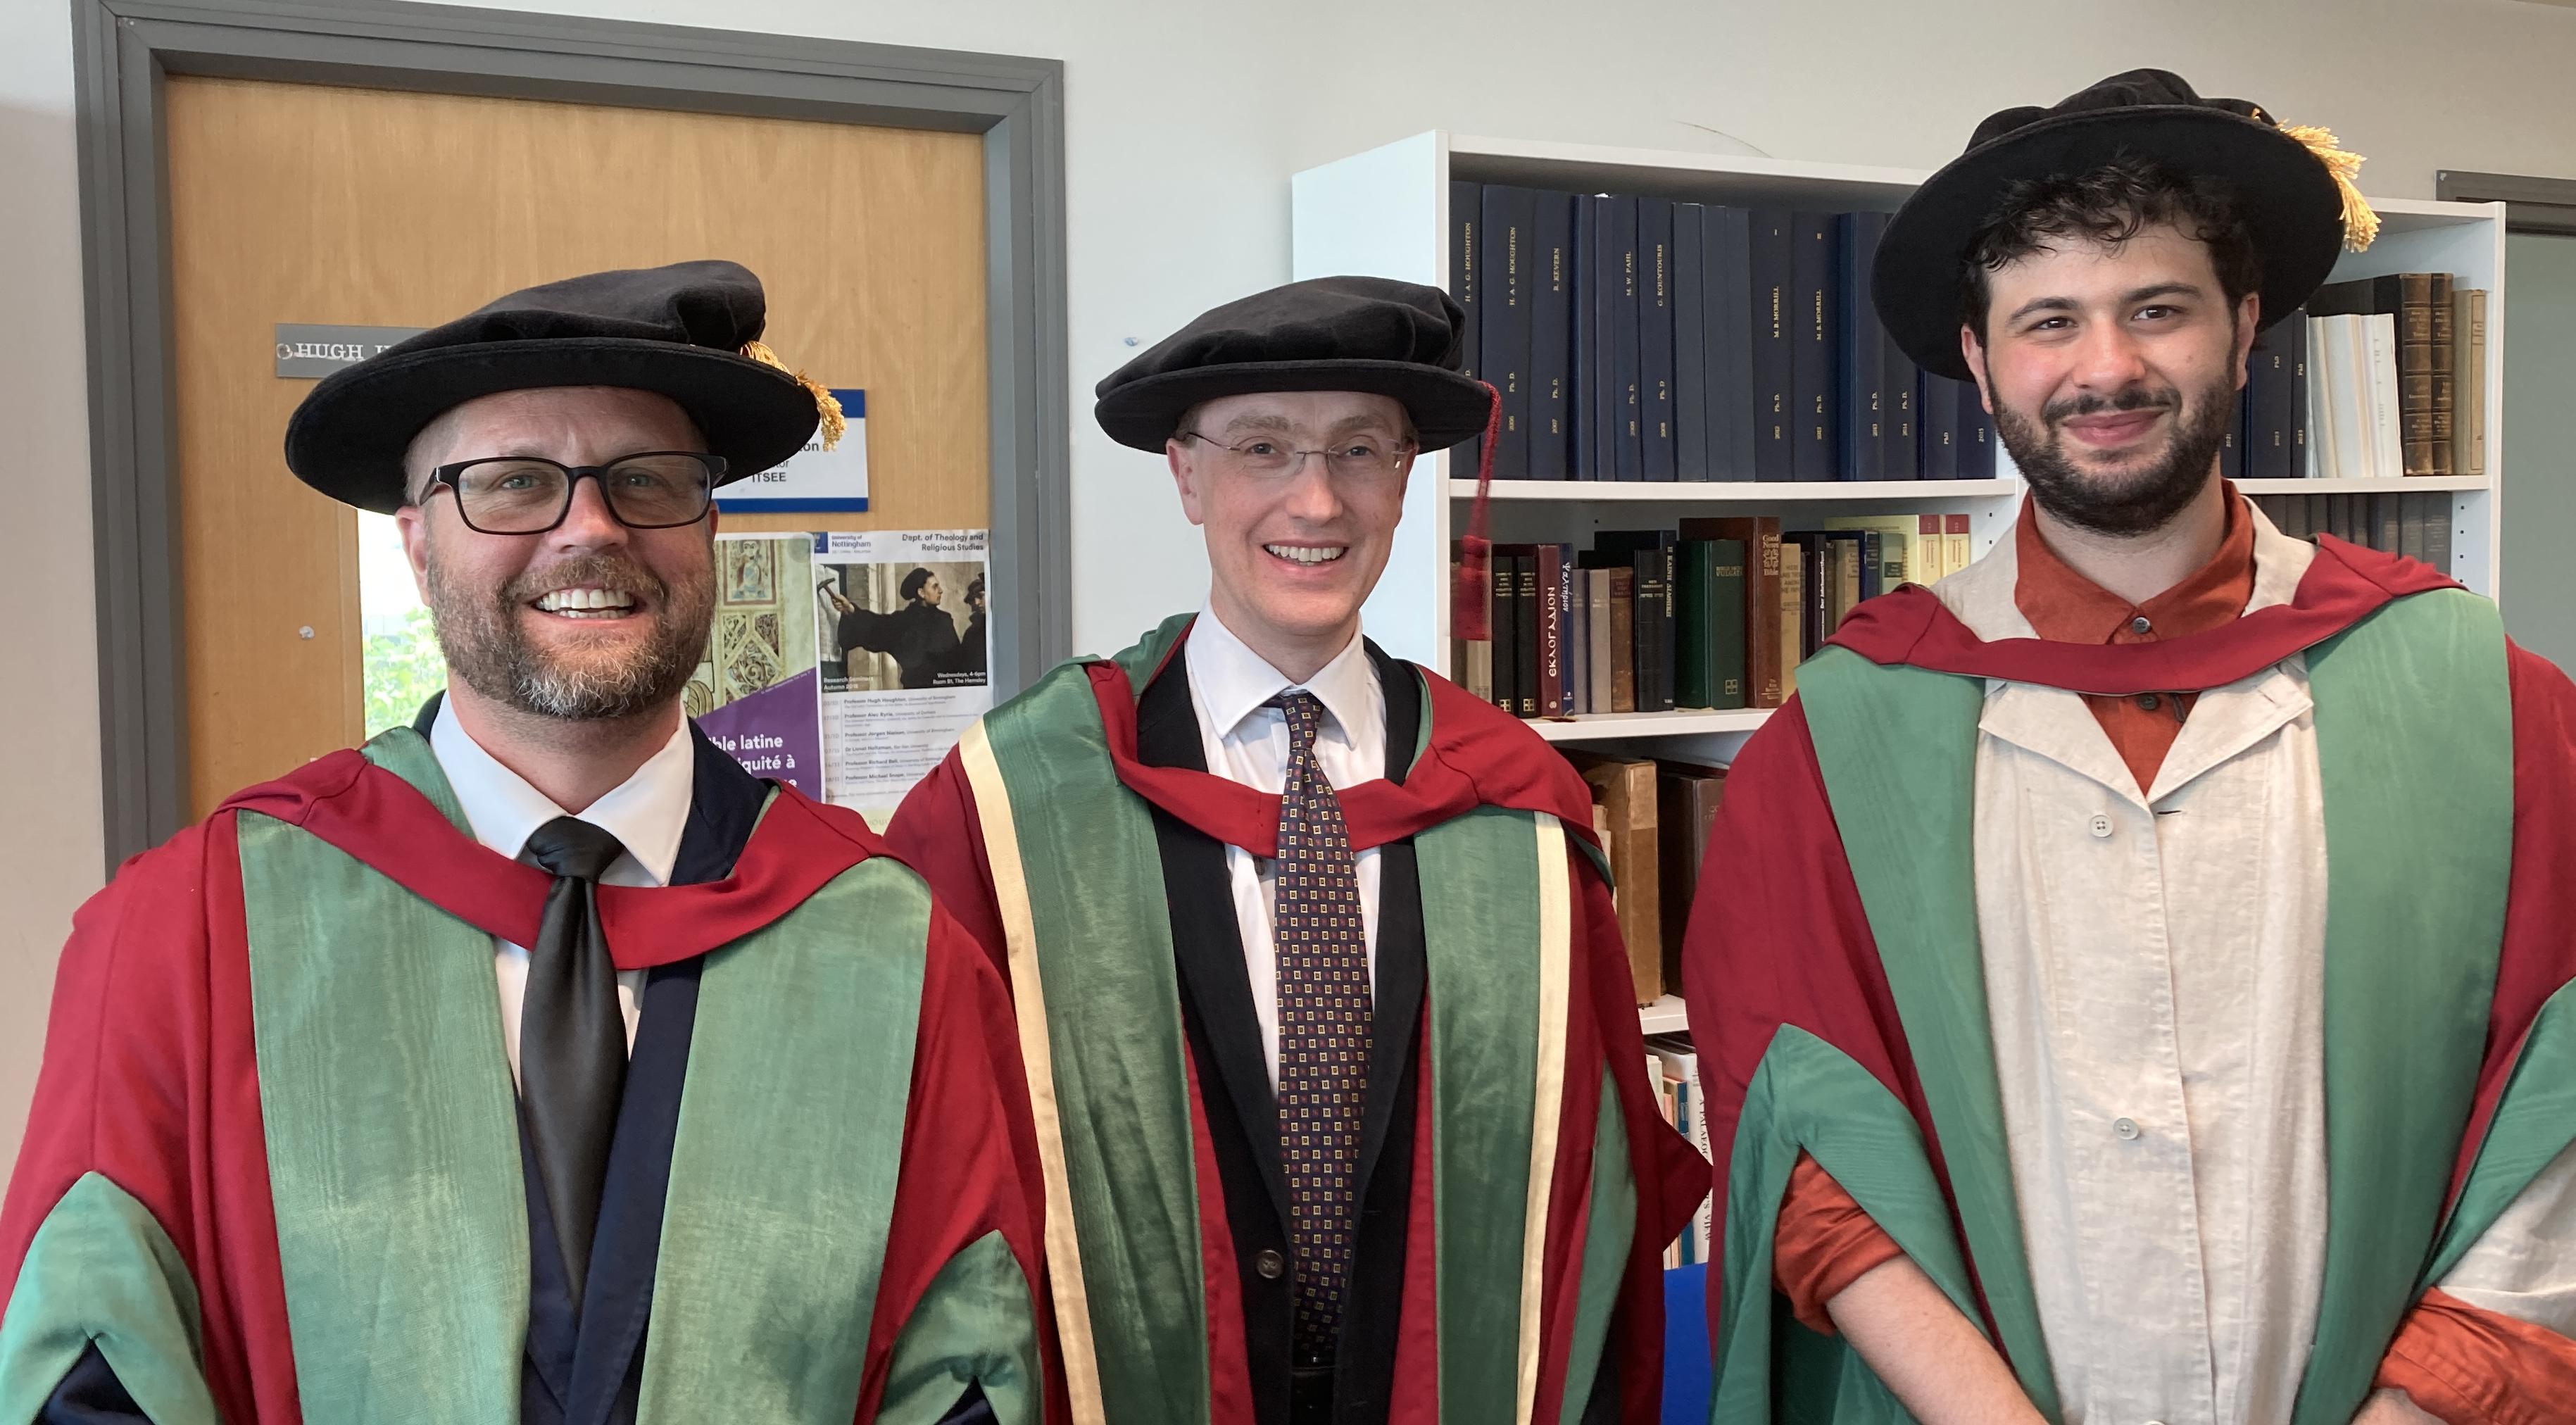 Three people in academic gowns